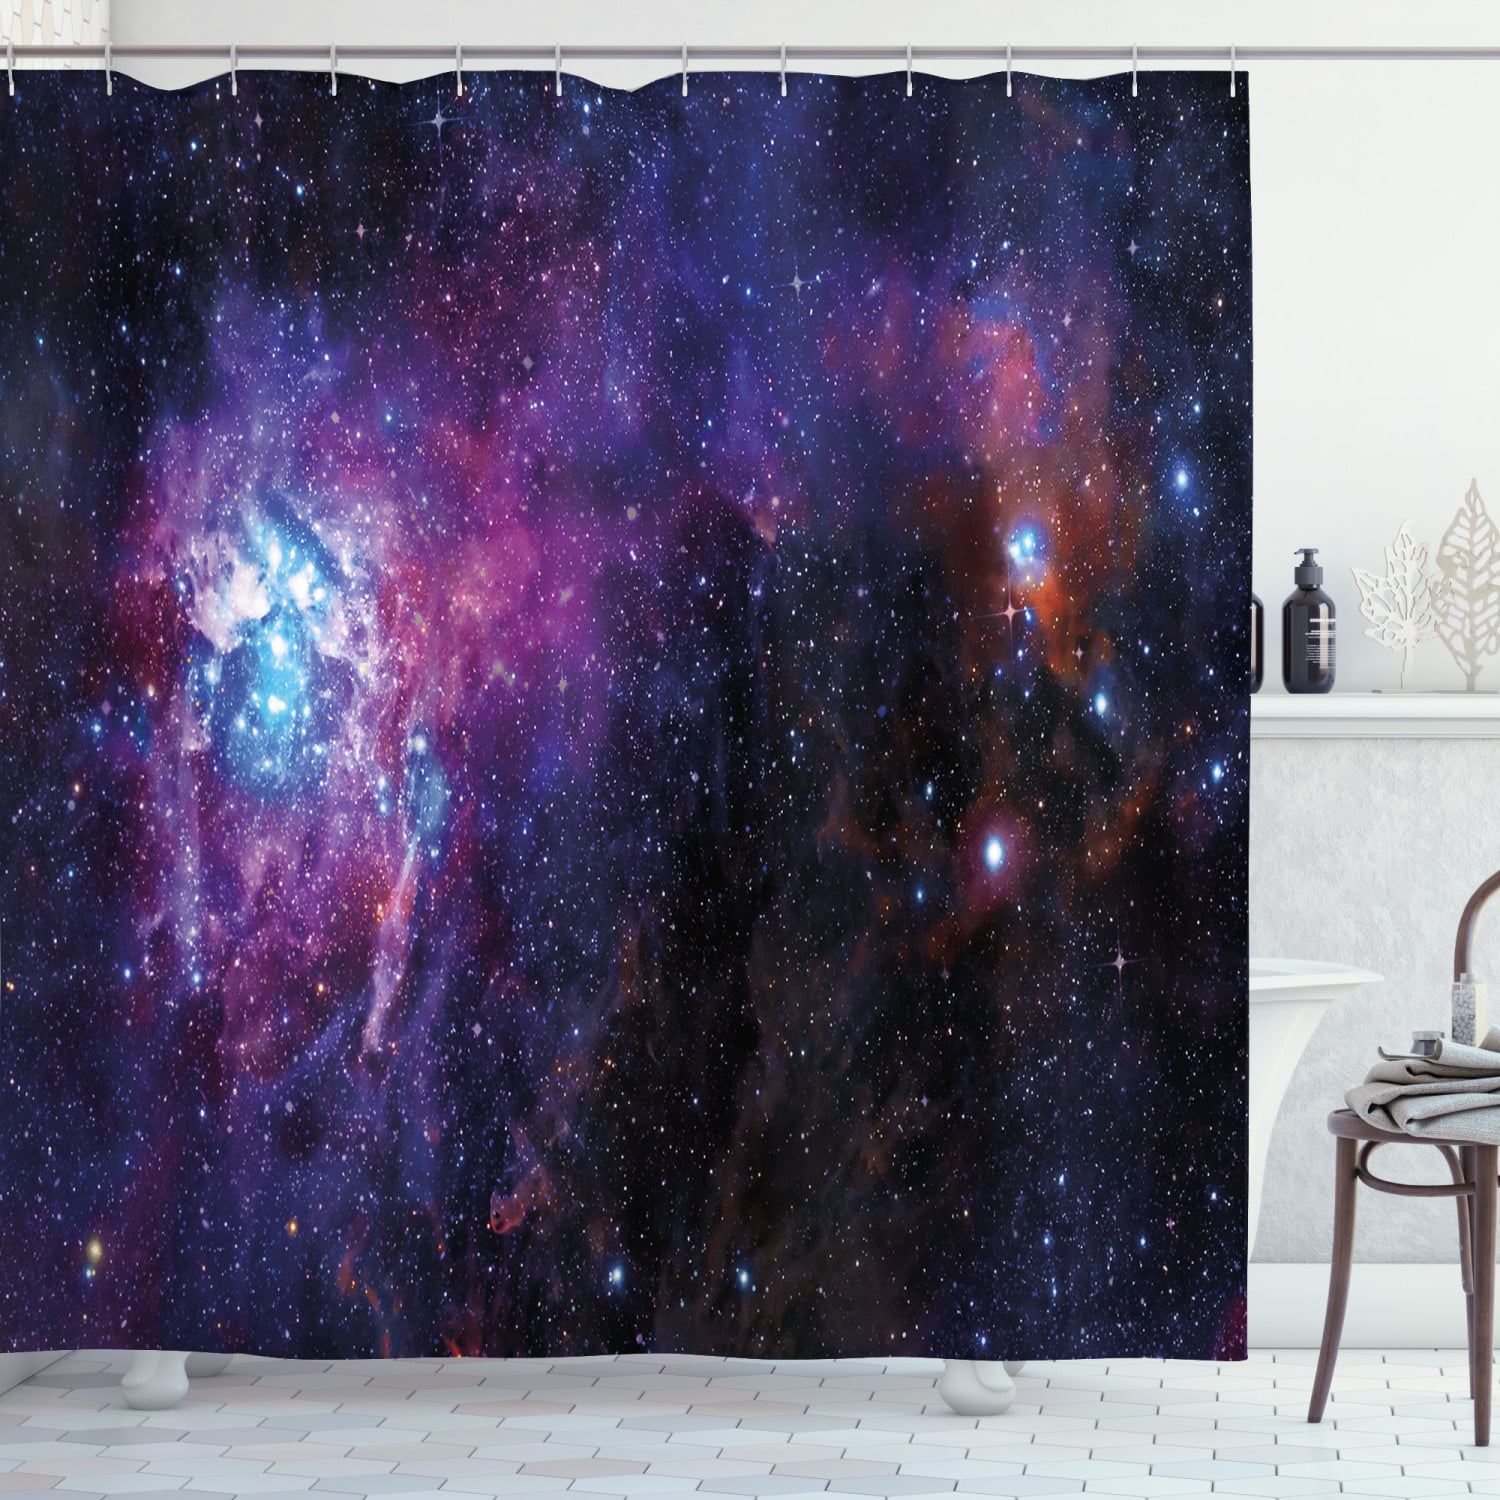 Details about   Galaxy Shower Curtain Starry Night Nebula Waterproof Frbric Shower Curtain Set 